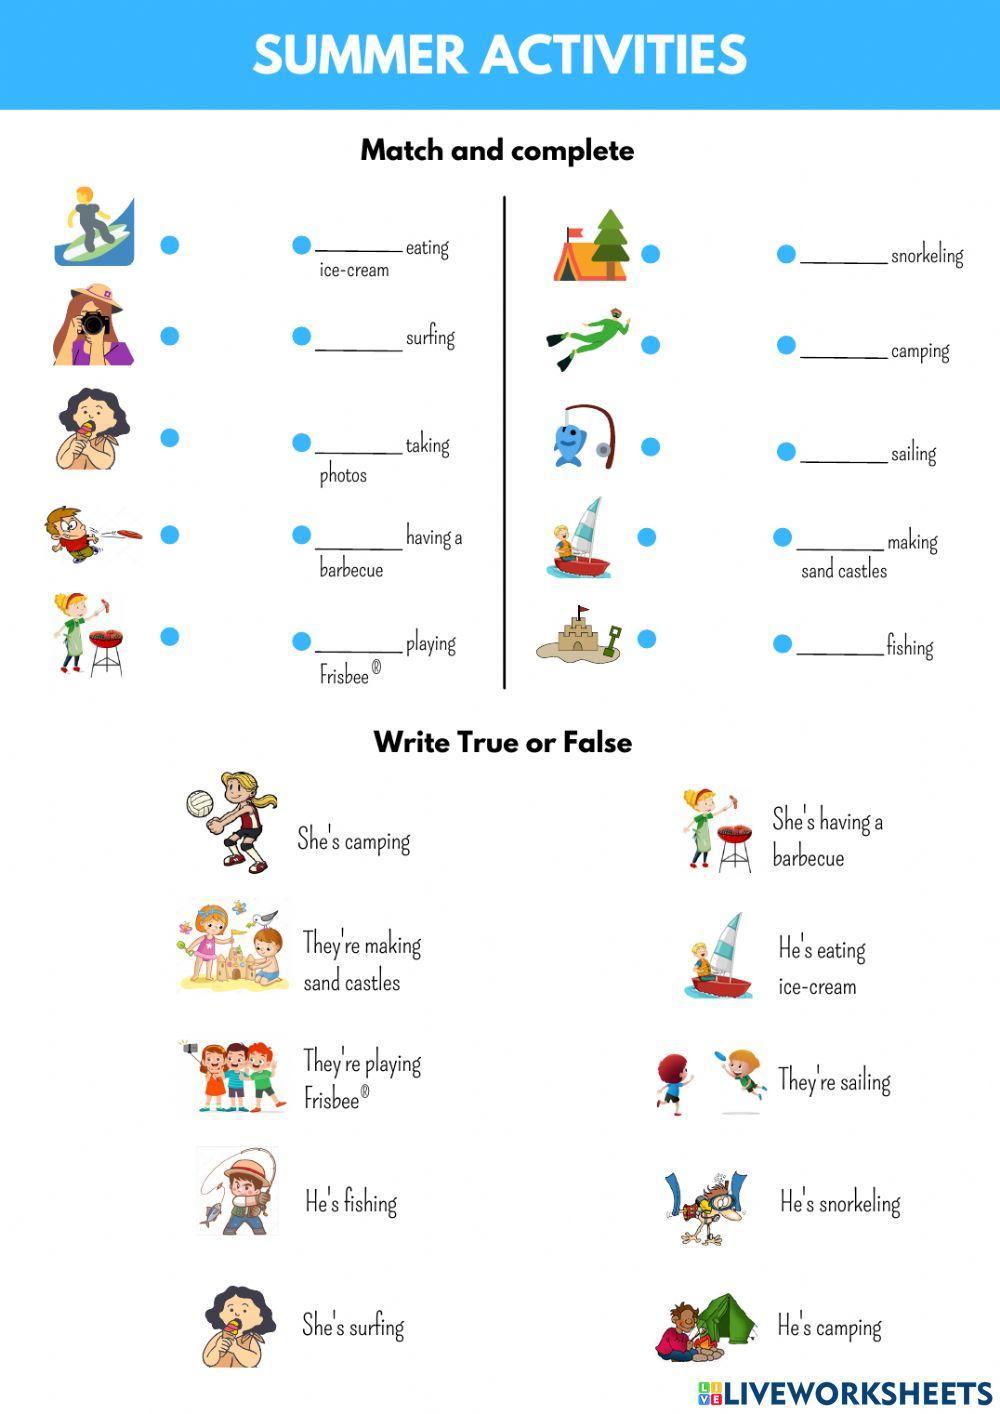 Summer Activities for Fun in Vaction Vocabulary